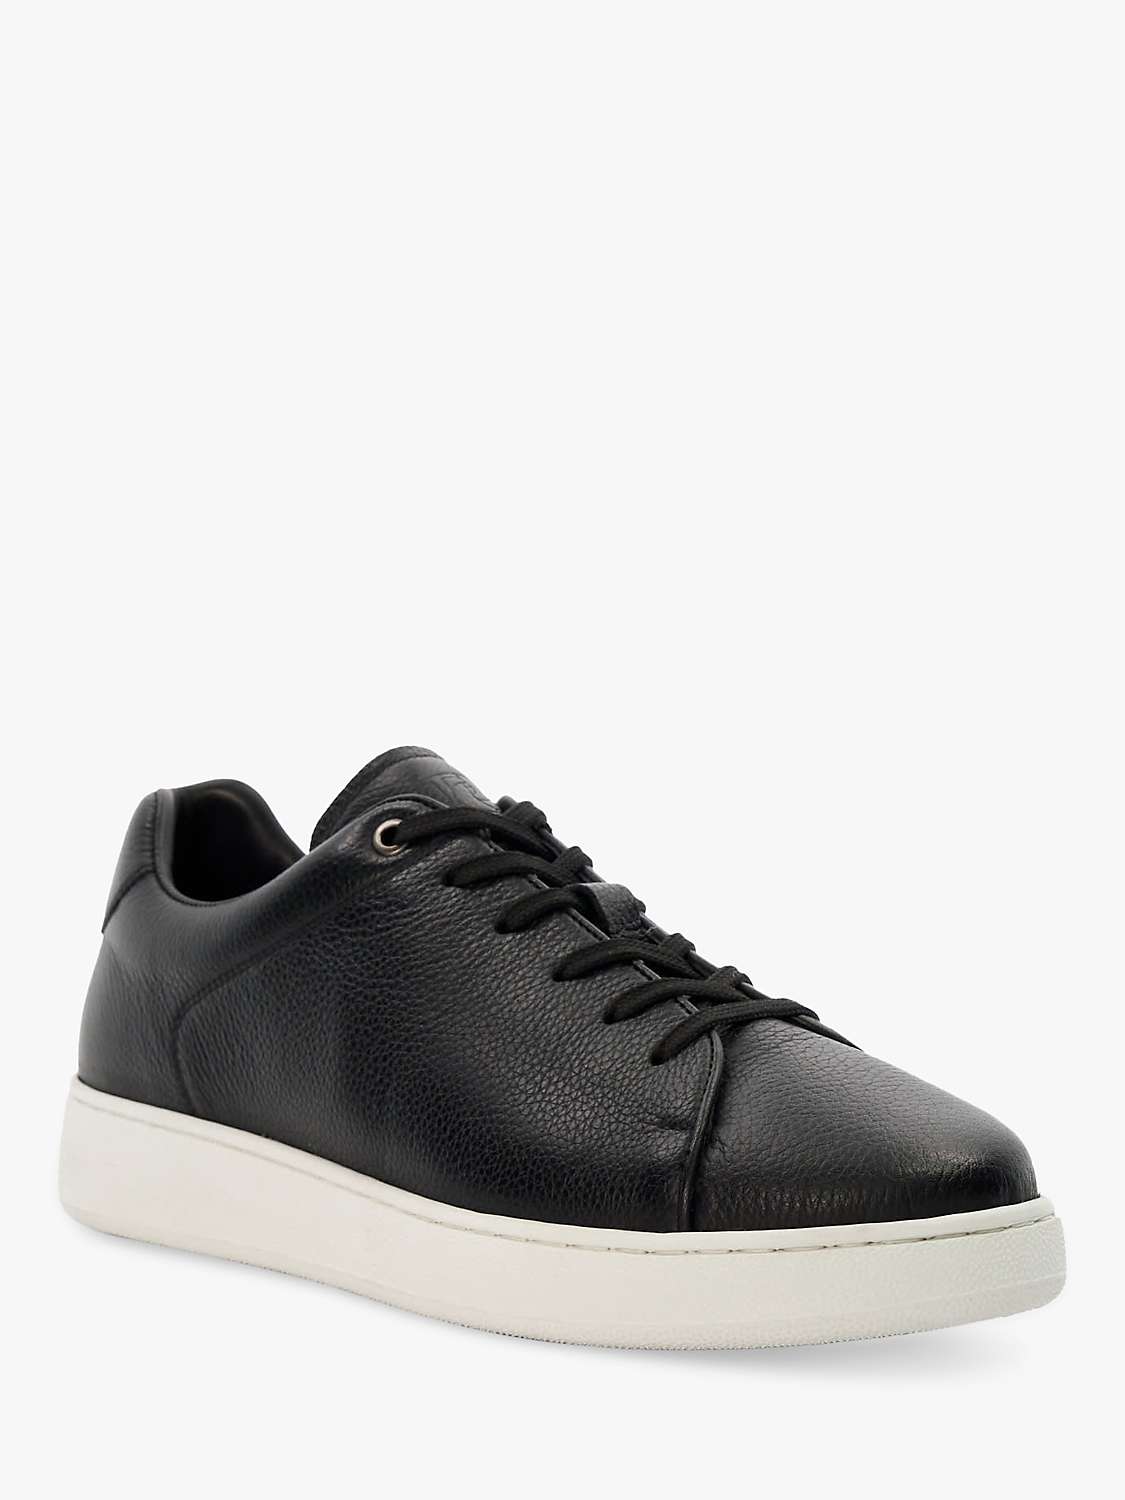 Buy Dune Theons Leather Lightweight Trainers Online at johnlewis.com